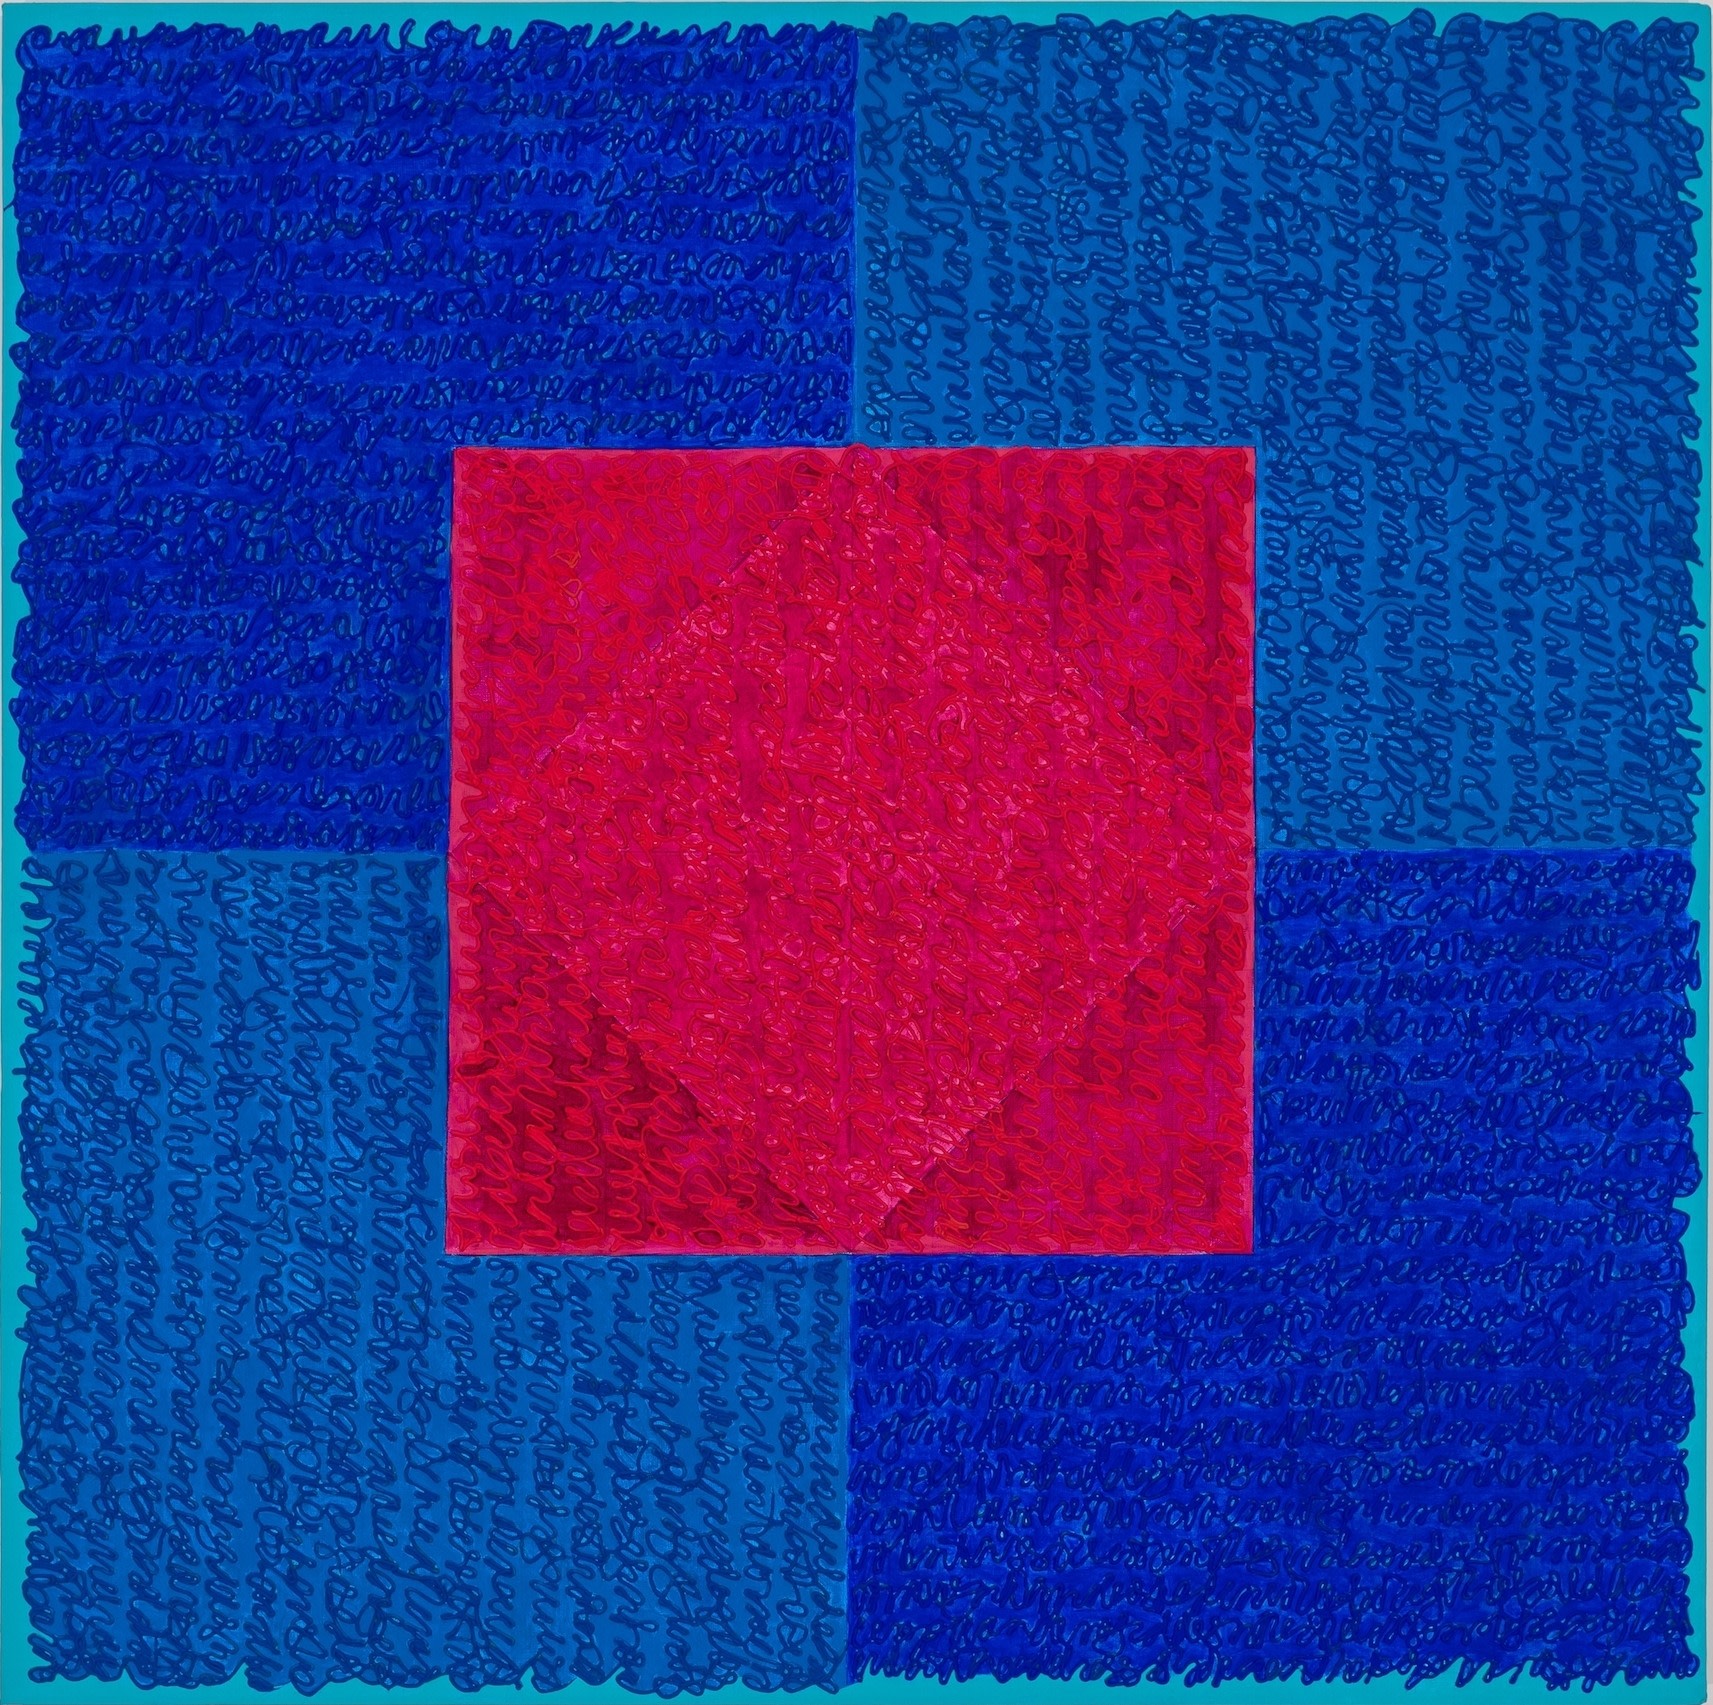 Louise P. Sloane, BB Red Square, 2018, Acrylic paint and pastes on linen, 42 x 42 inches, SOLD, Signed, titled and dated on the verso, four rectangles and a central square (different shades of blue with red) and personal text written over the squares to create three dimensional texture. Louise P. Sloane has been creating abstract paintings since 1974.